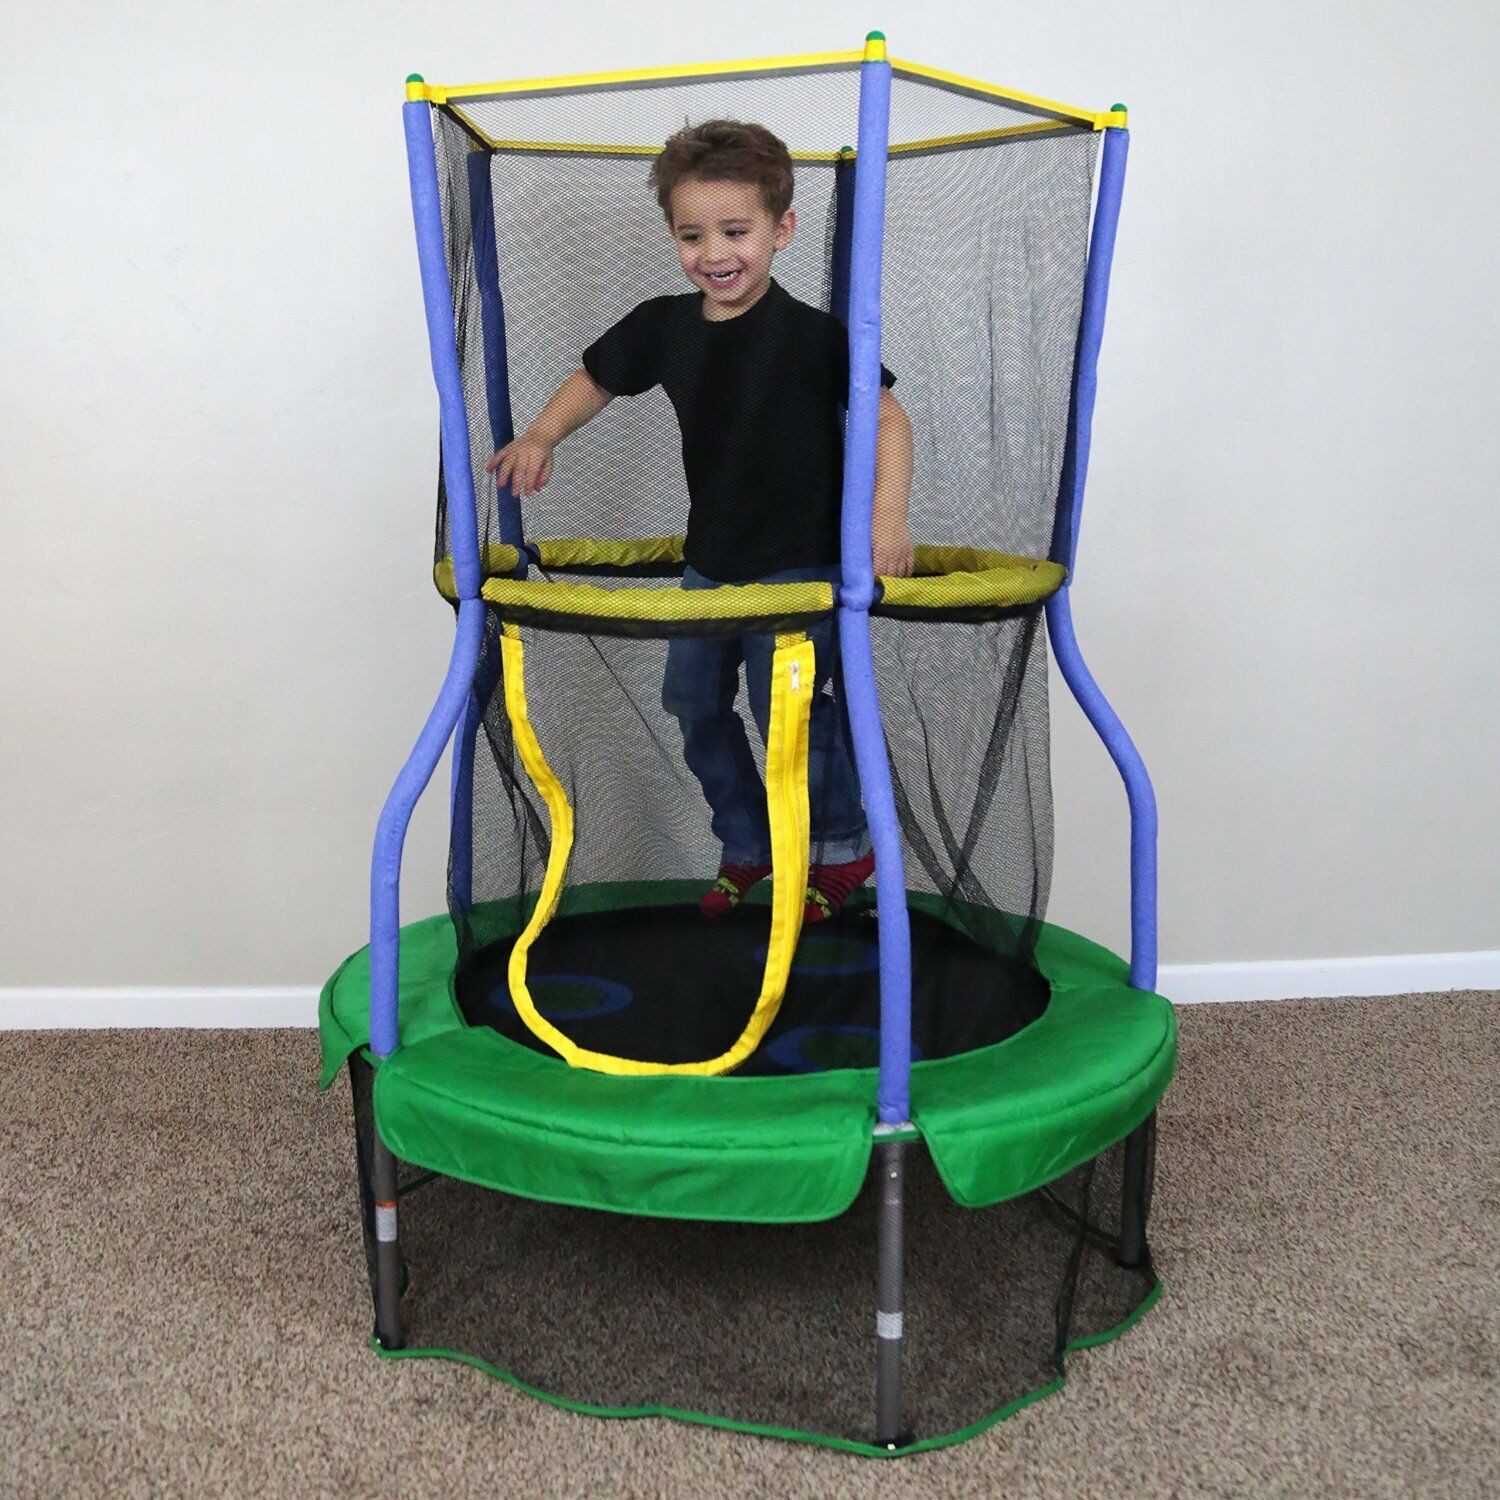 Outdoor Trampoline For Kids
 Trampoline Bounce Jump Safety Net Pad Kids Toy Indoor